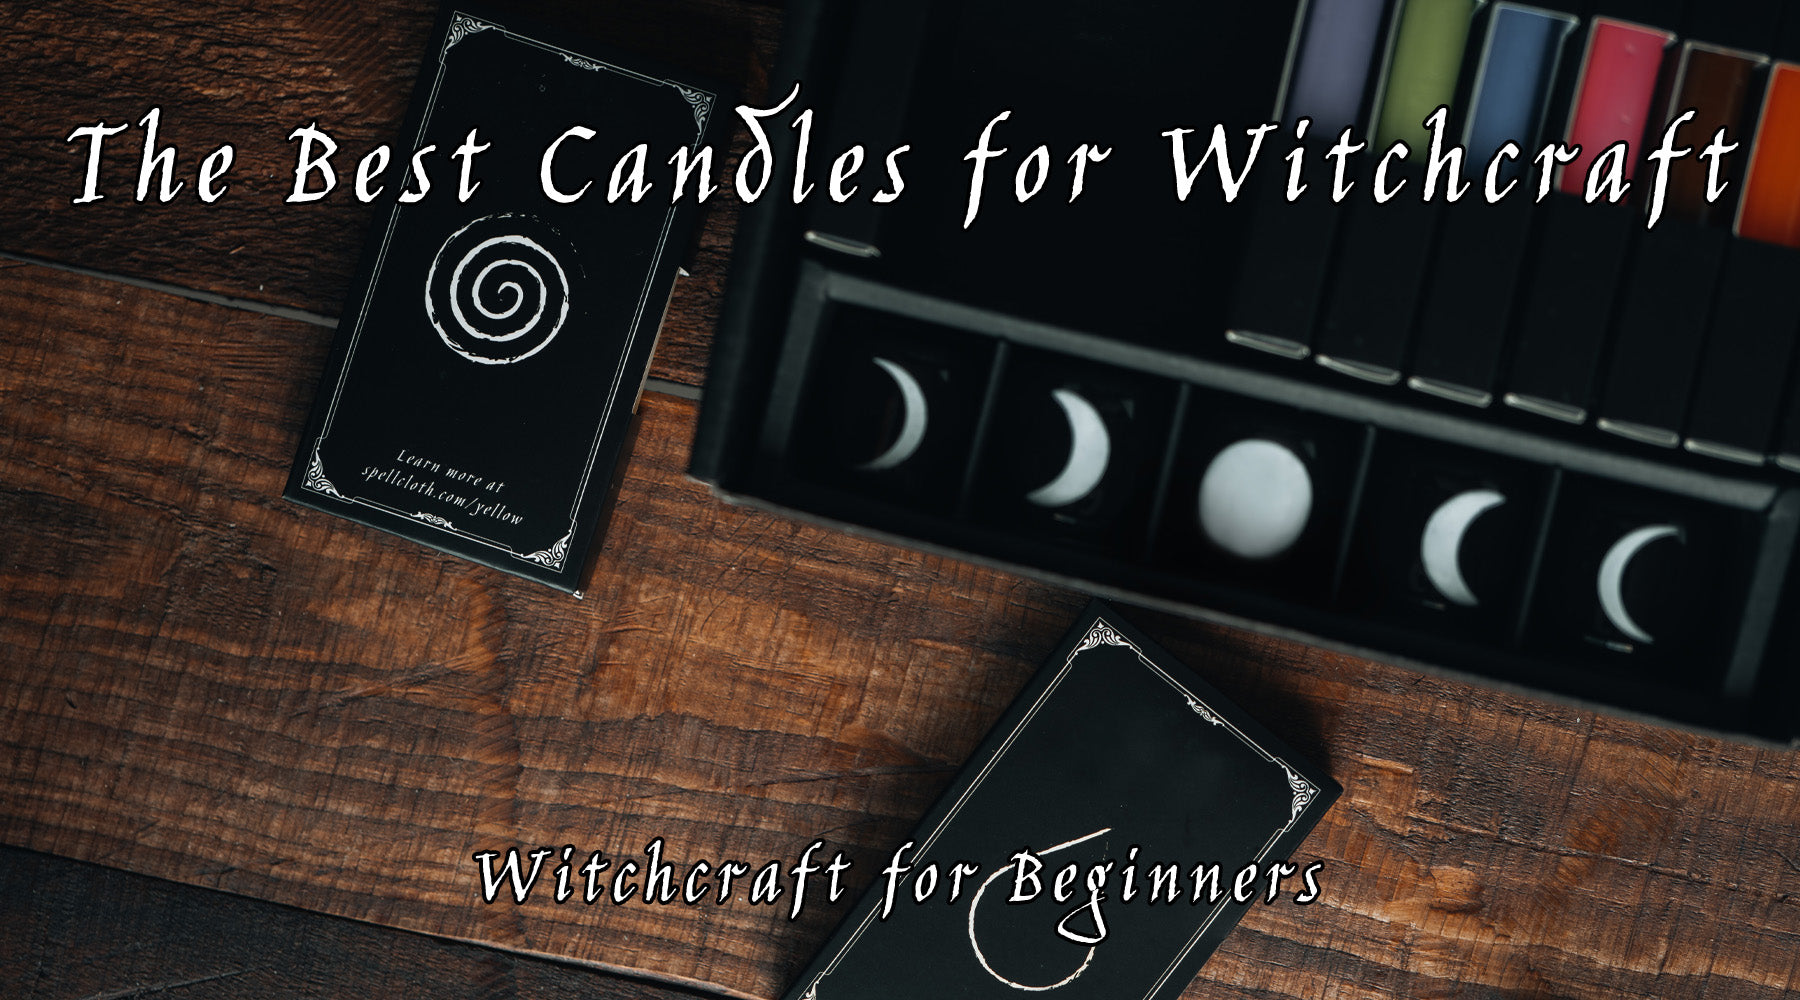 The Best Candles for Witchcraft